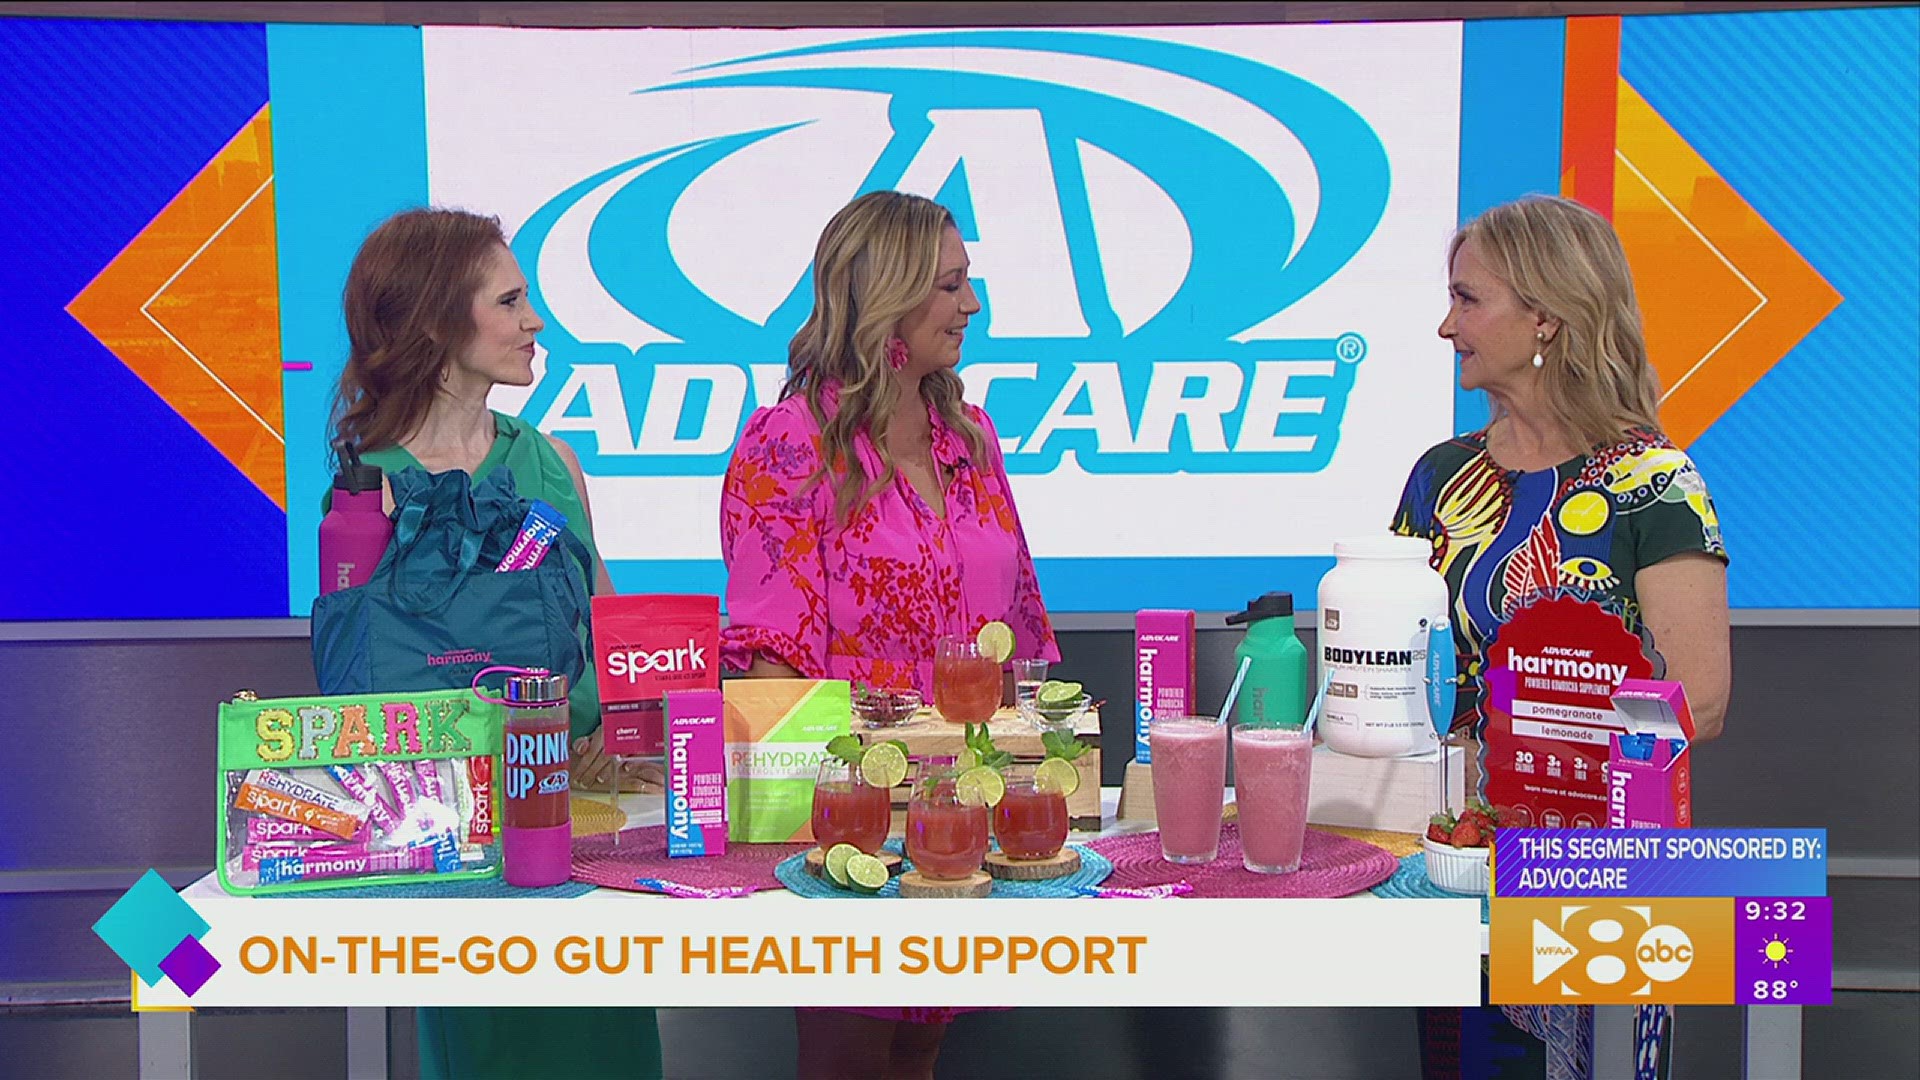 This segment is sponsored by: AdvoCare